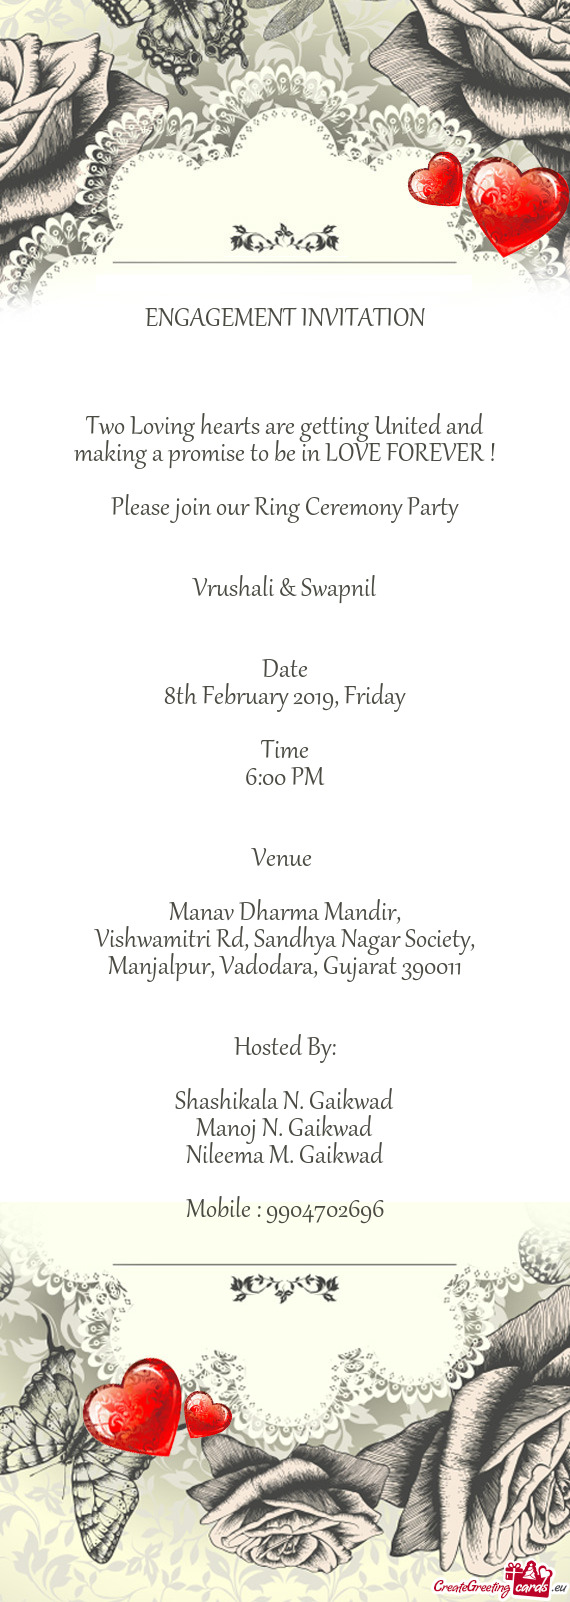 E FOREVER !
 
 Please join our Ring Ceremony Party
 
 
 Vrushali & Swapnil
 
 
 Date
 8th February 2